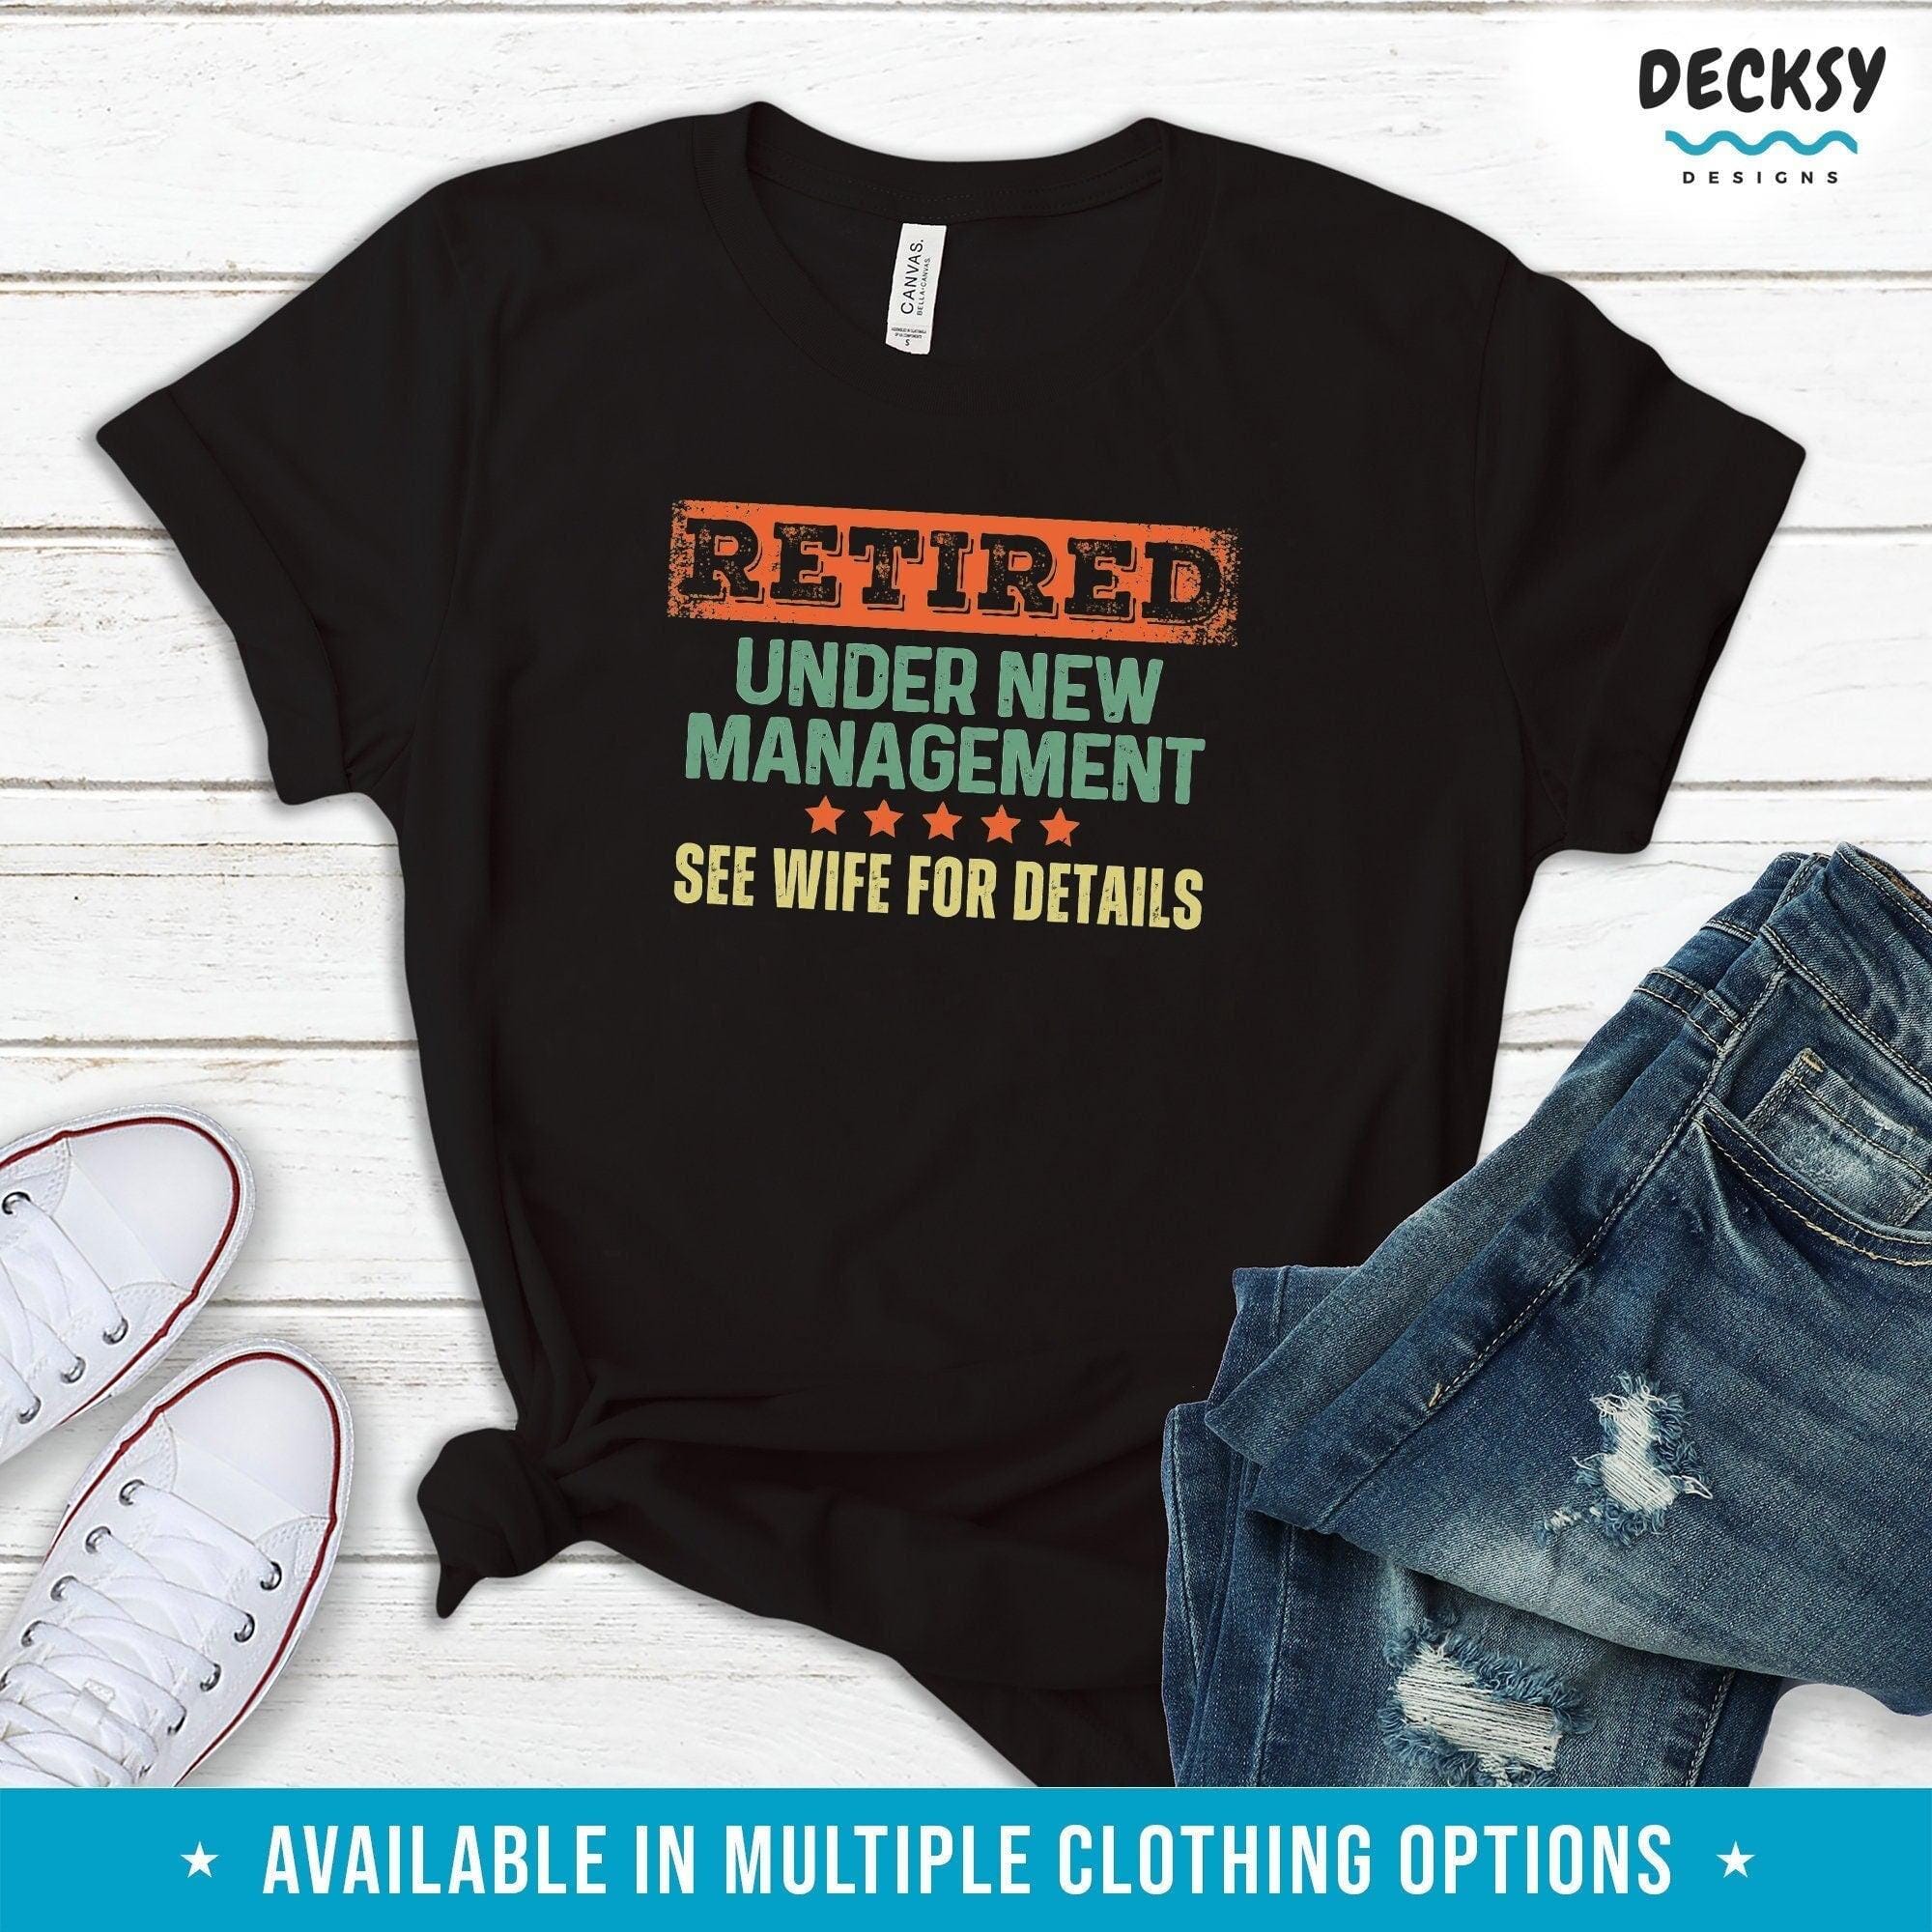 Retirement Shirt, Gift For Husband From Wife-Clothing:Gender-Neutral Adult Clothing:Tops & Tees:T-shirts:Graphic Tees-DecksyDesigns